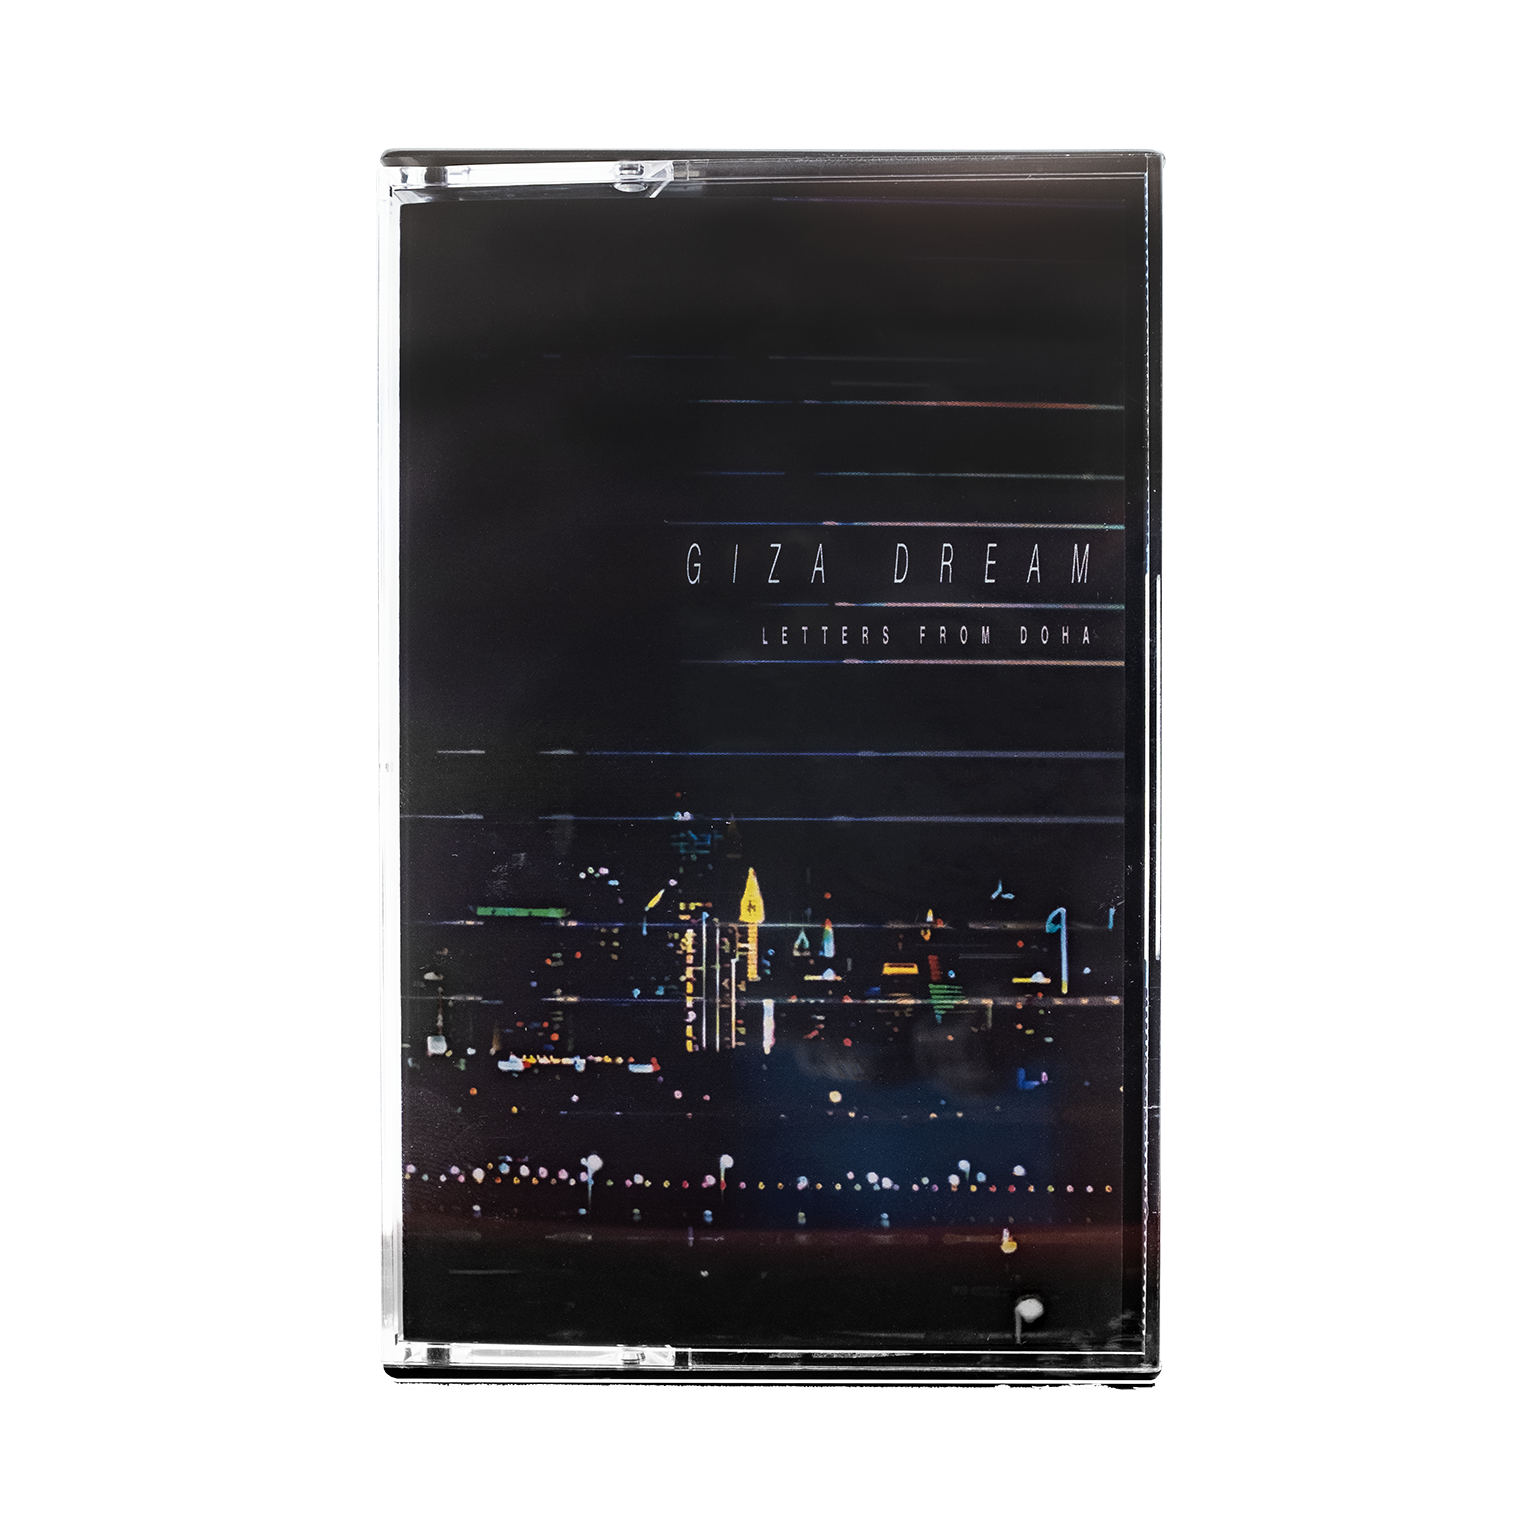 Giza Dream - Letters From Doha (Limited Edition Cassette)